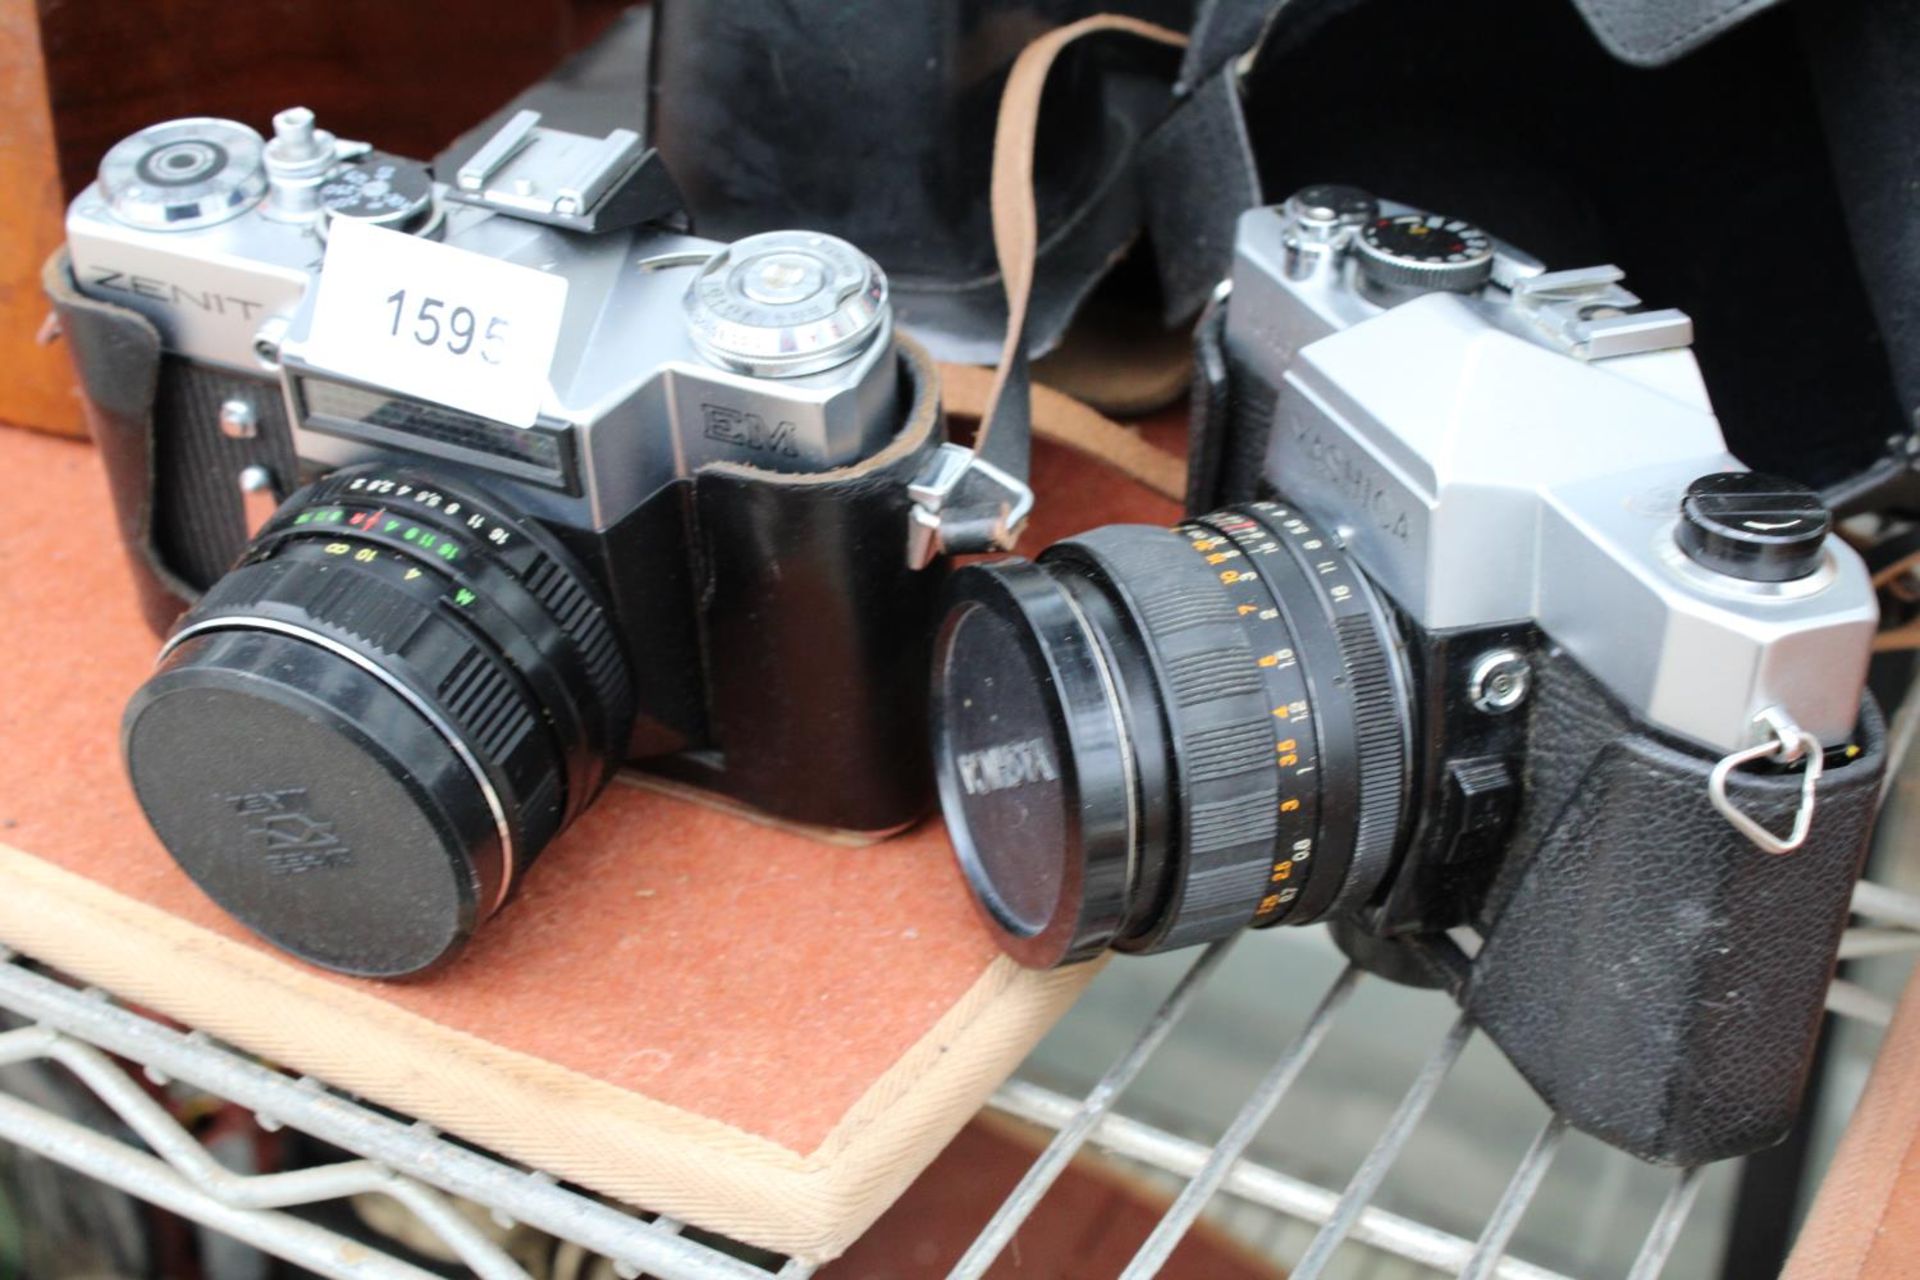 AN ASSORTMENT OF CAMERA EQUIPMENT TO INCLUDE A ZENIT CAMERA, YASHICA CAMERA AND A CANON ZOOM LENS - Image 3 of 3